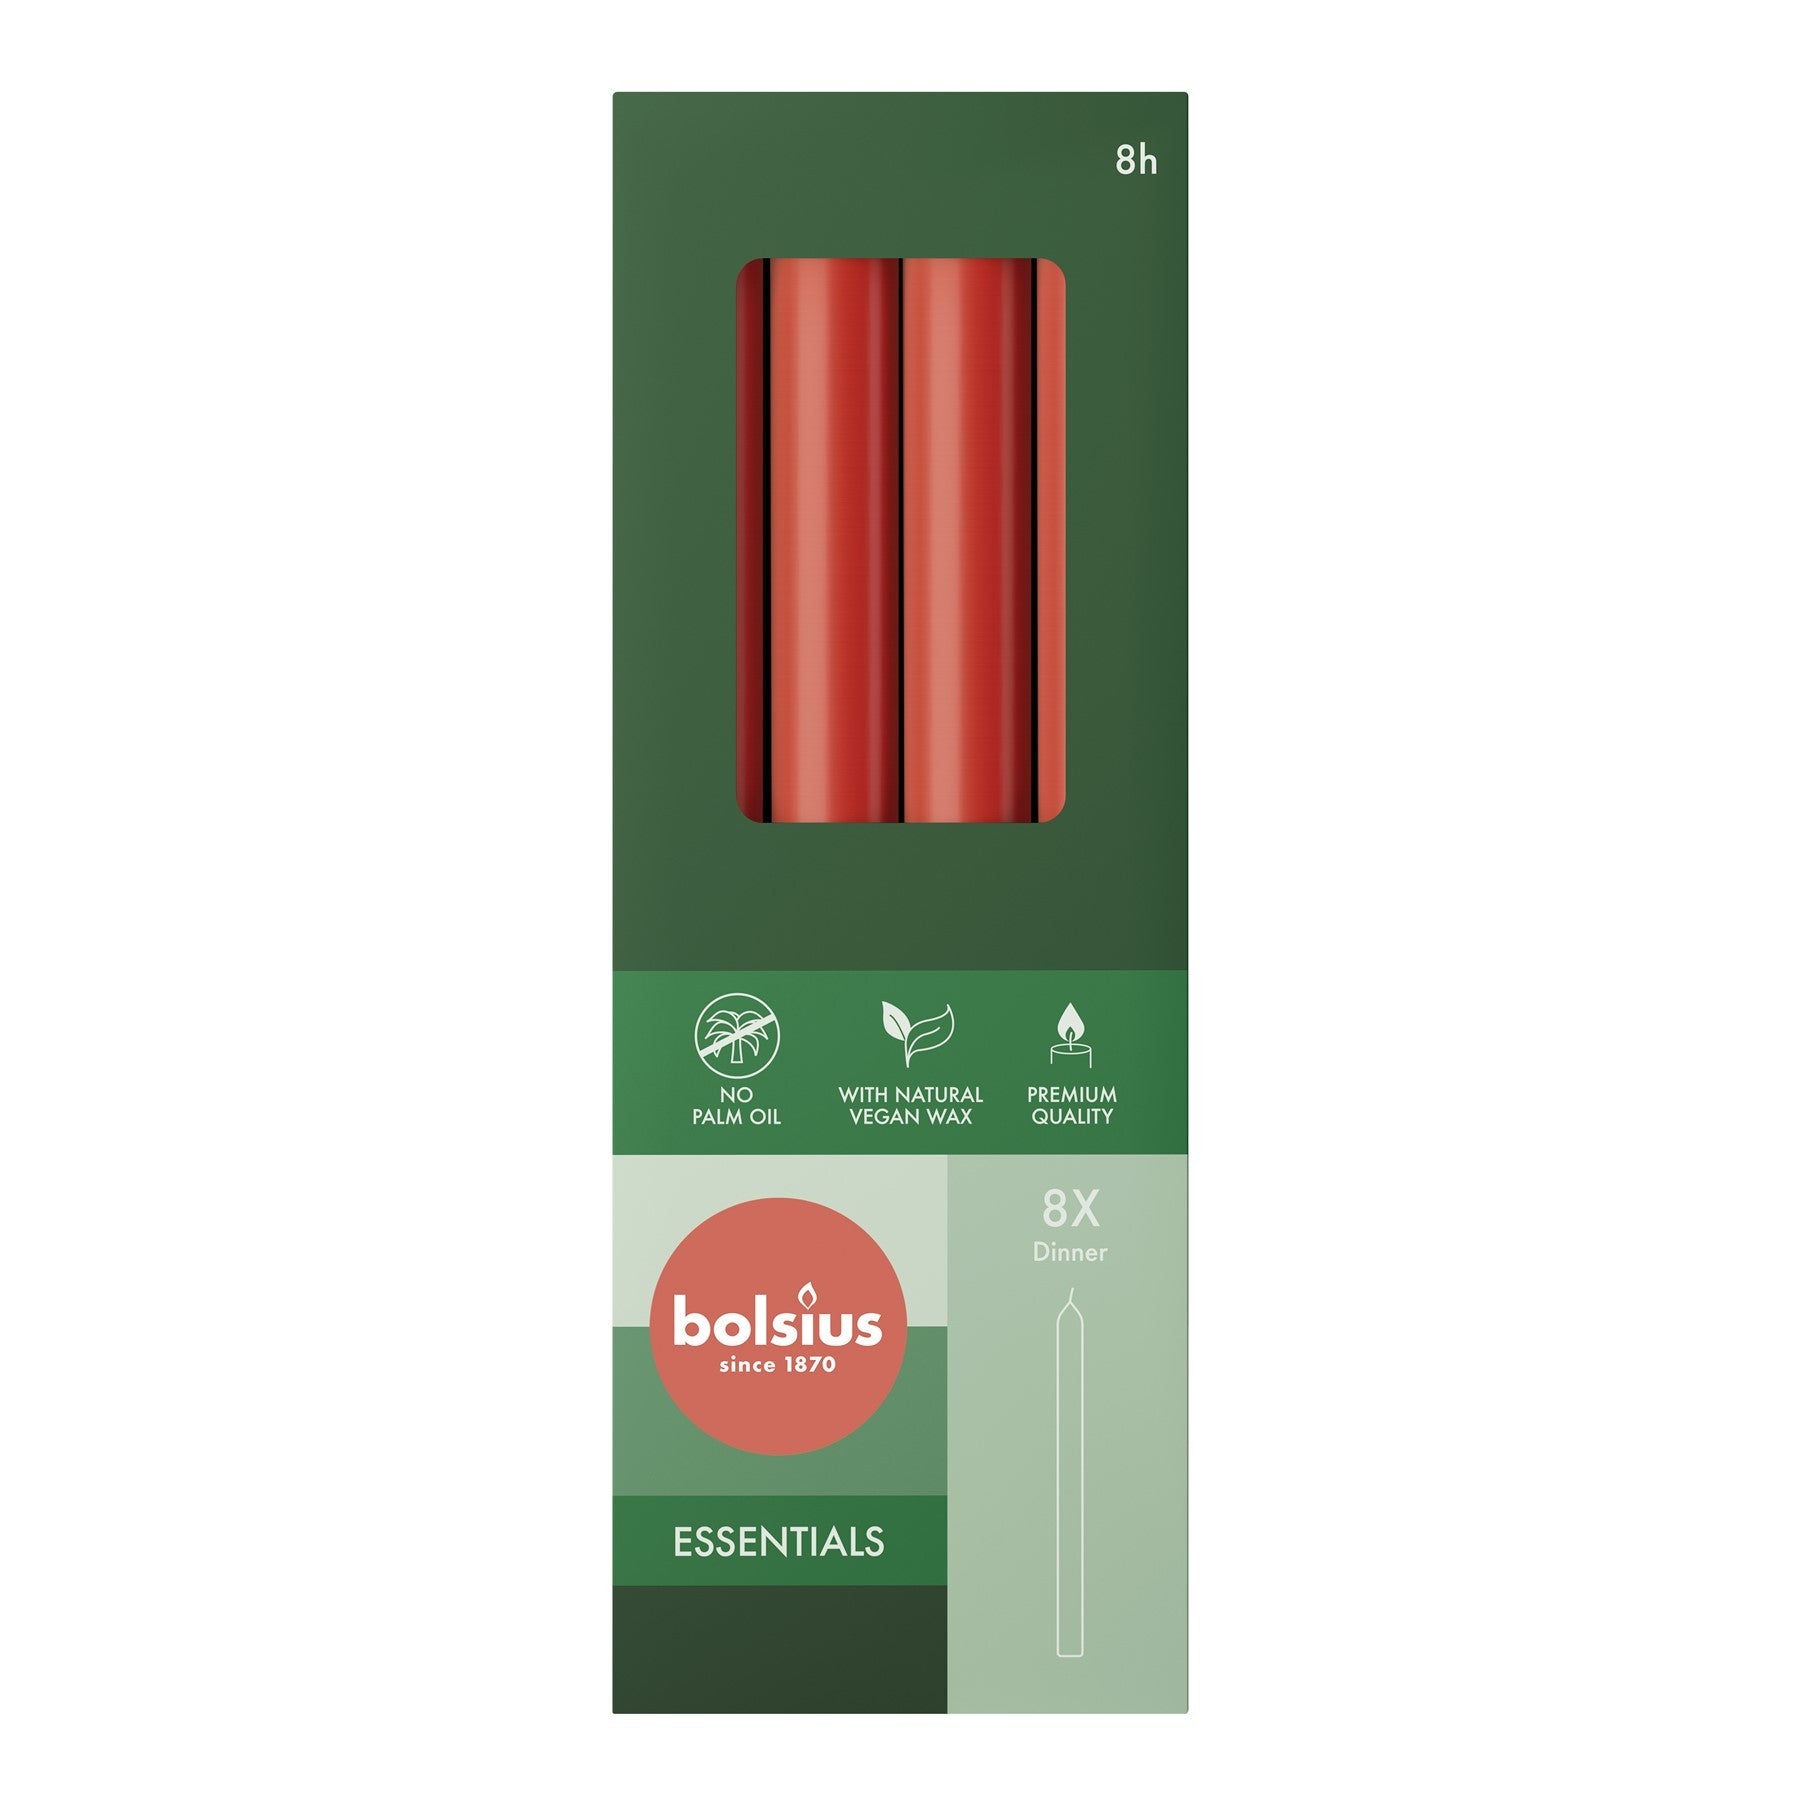 View Bolsius Delicate Red Box of 8 Dinner Candles 230mm x 20mm information